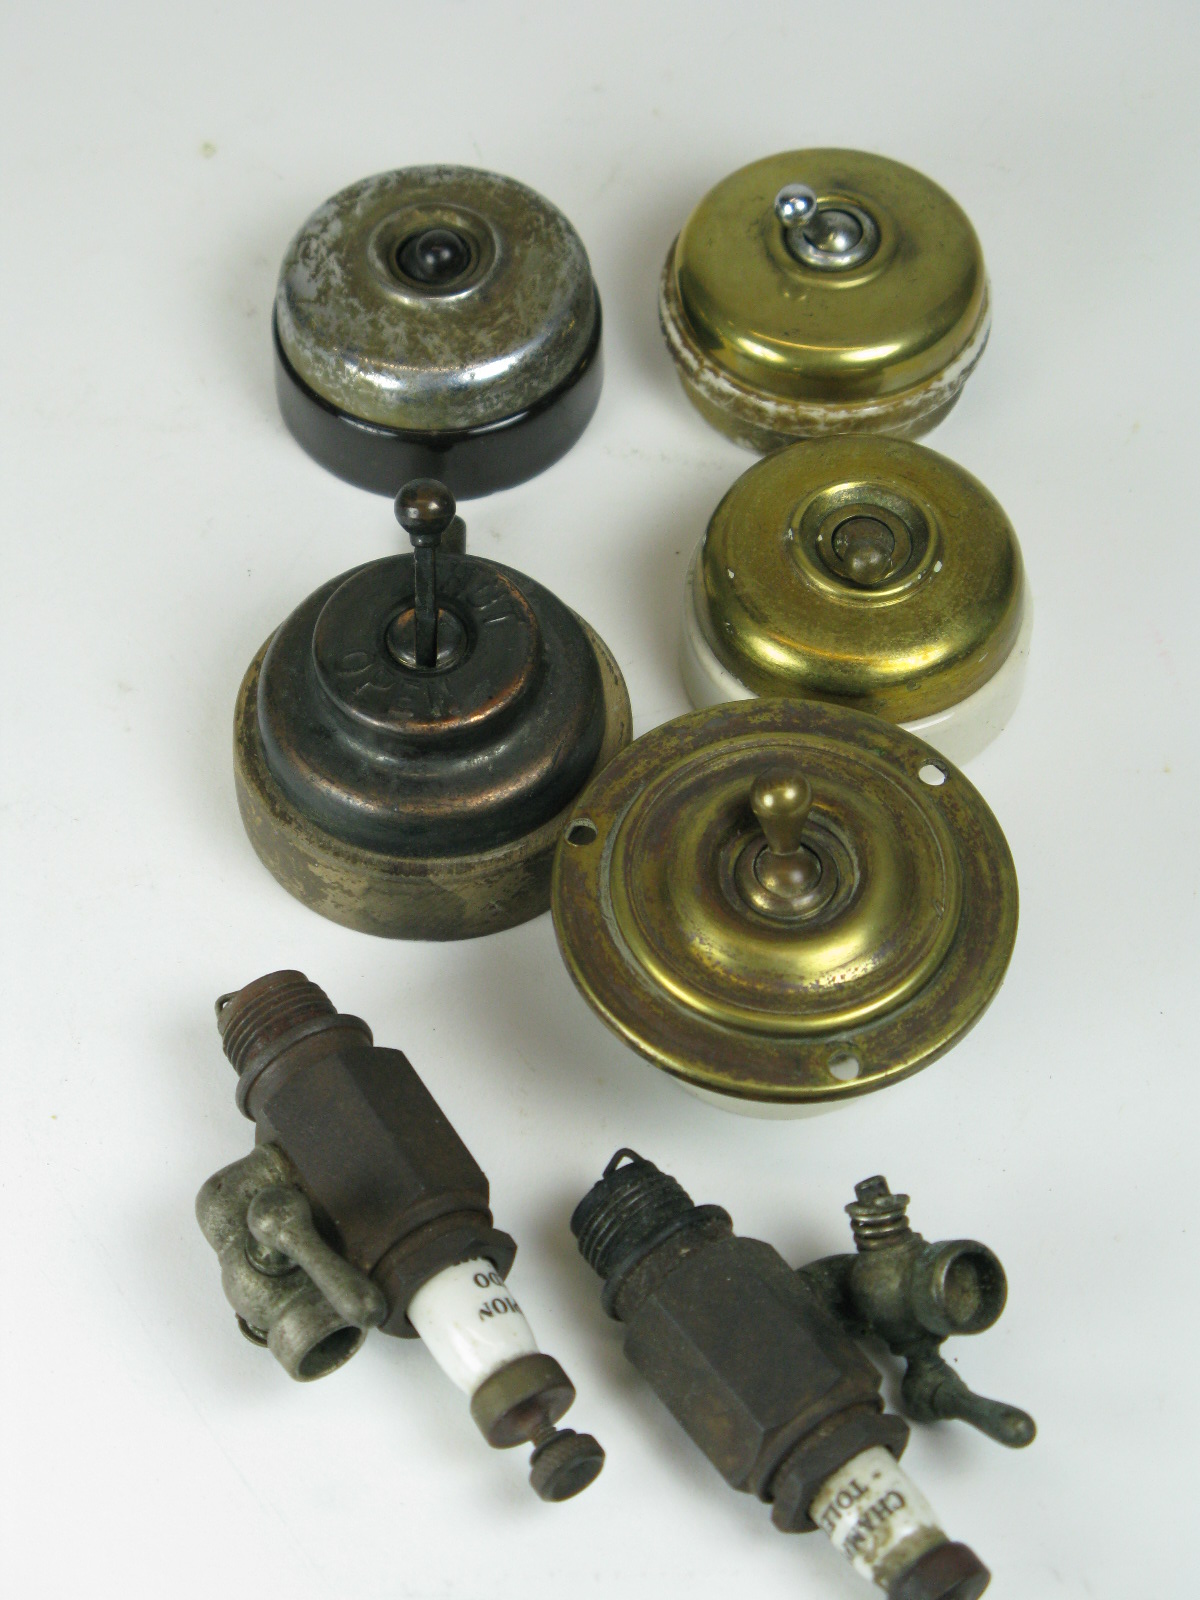 Veteran Car Switches. Five early style switches of the type used as ignition switches on early